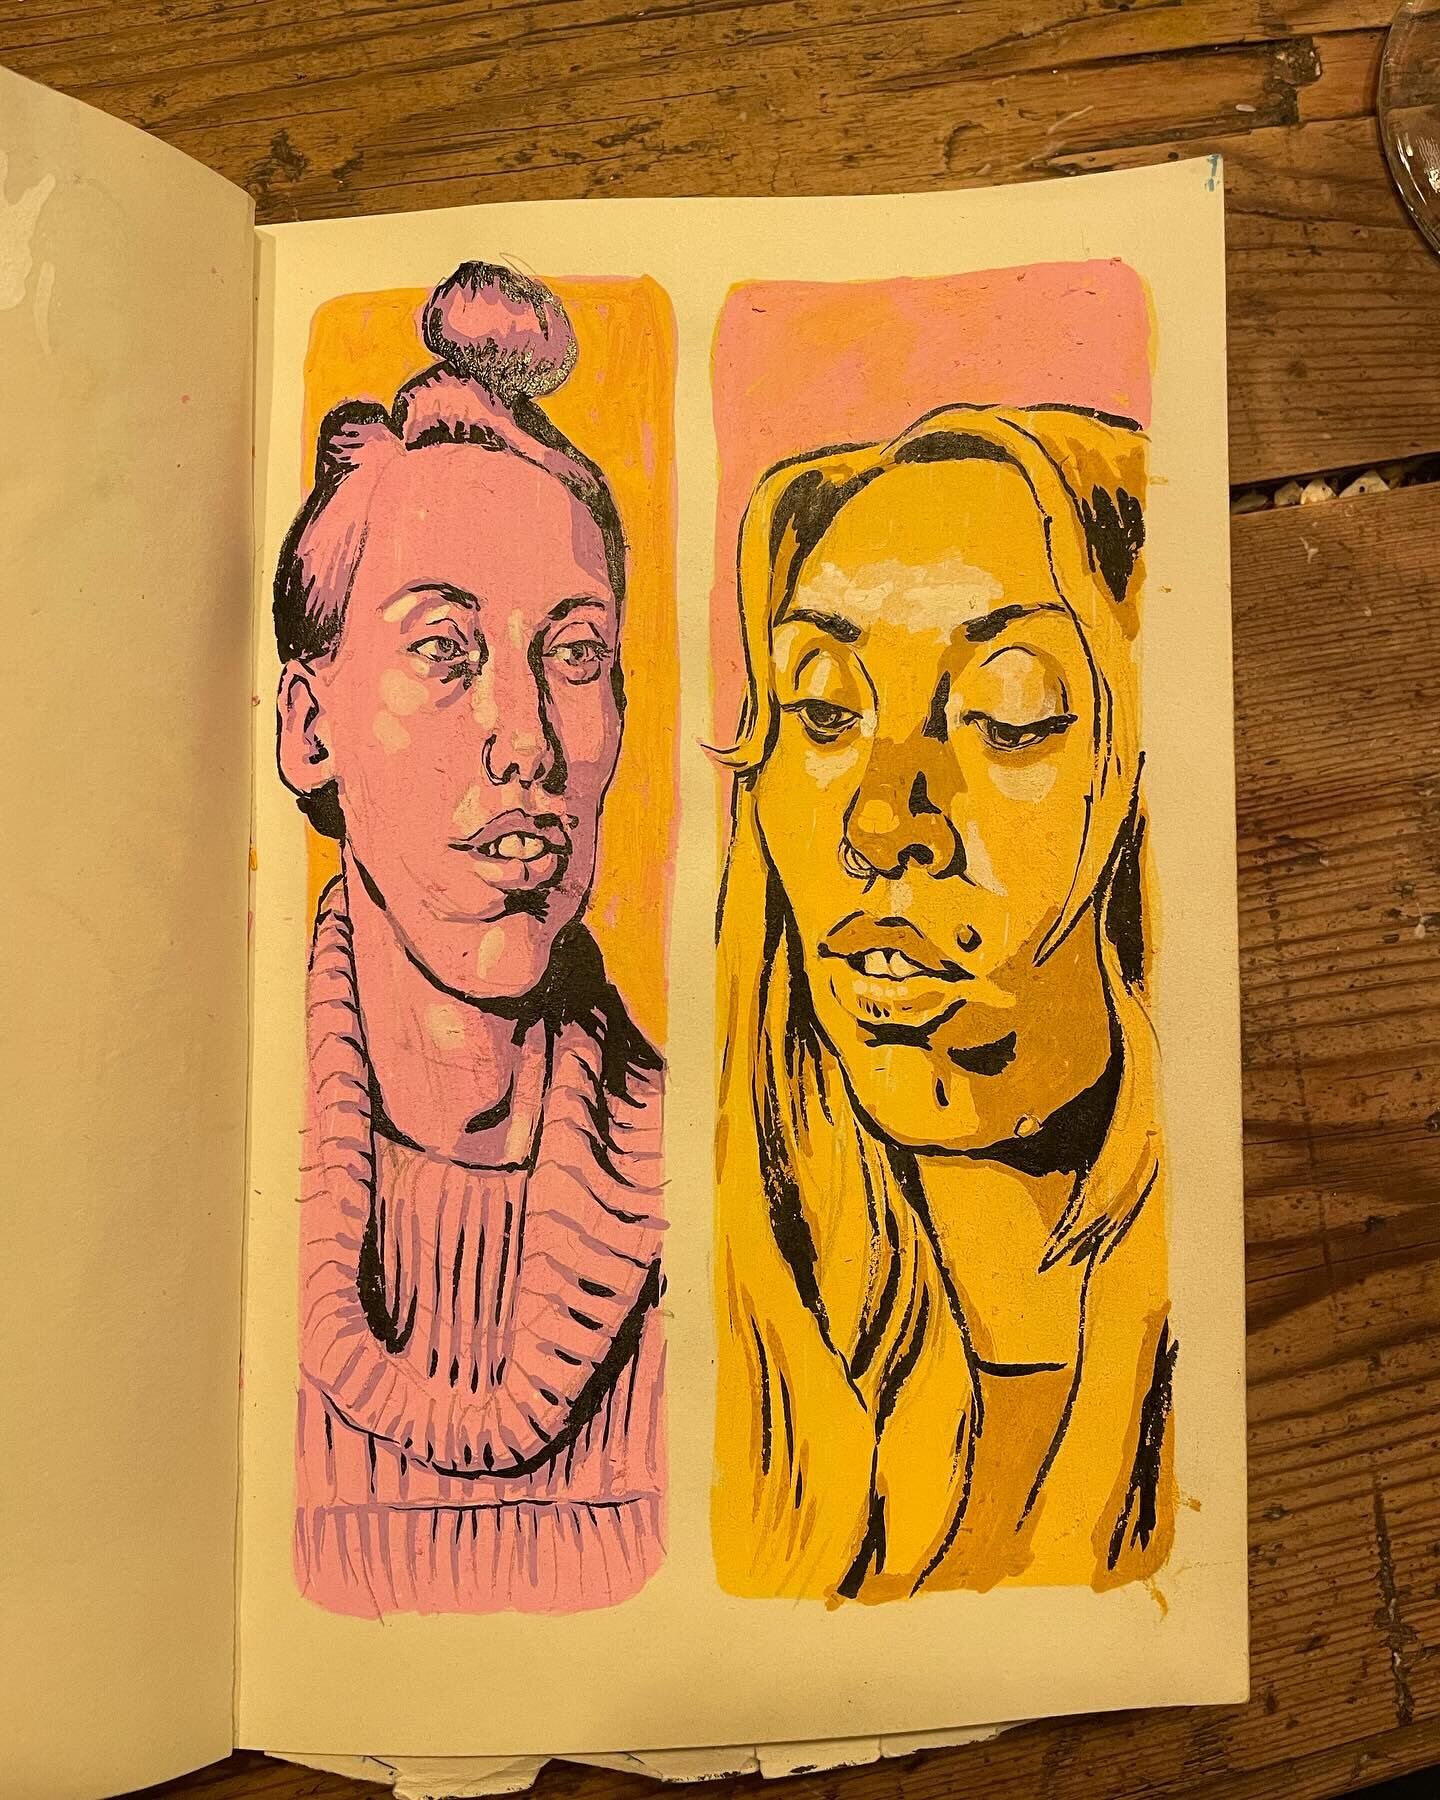 More faces.

Here are two portraits and some process of Monday night's Draw Brighton portrait model, Ellis O'Connor. 

As always, it was a delight to draw (though I was up late finishing these as earlier in the evening my 11 year old, Aurelia, was gi